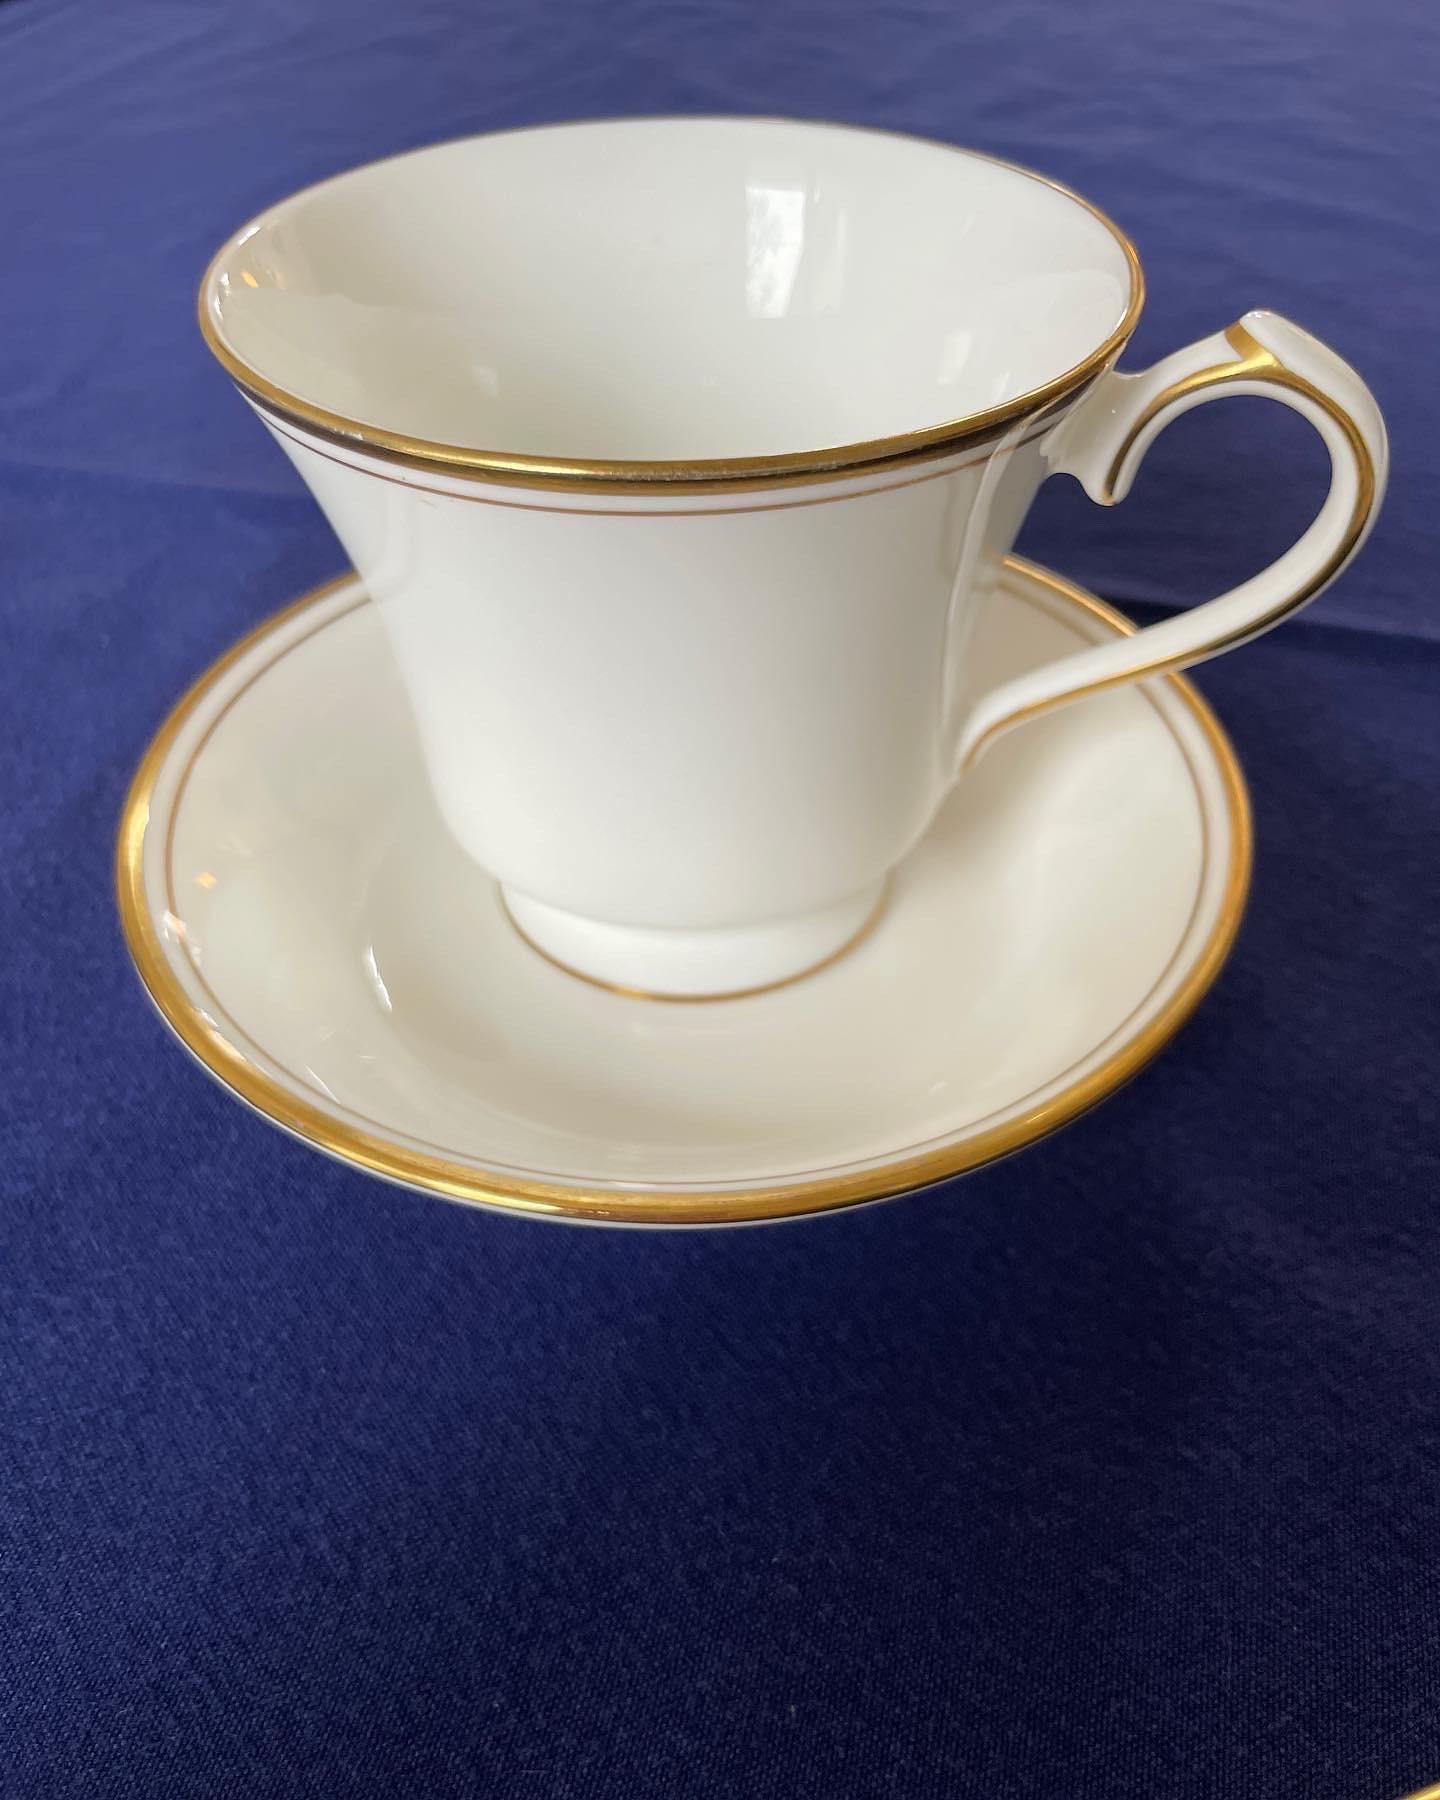 Late 20th Century Aynsley Fine Bone China Table Service for 12 people, Corona Gold Model 